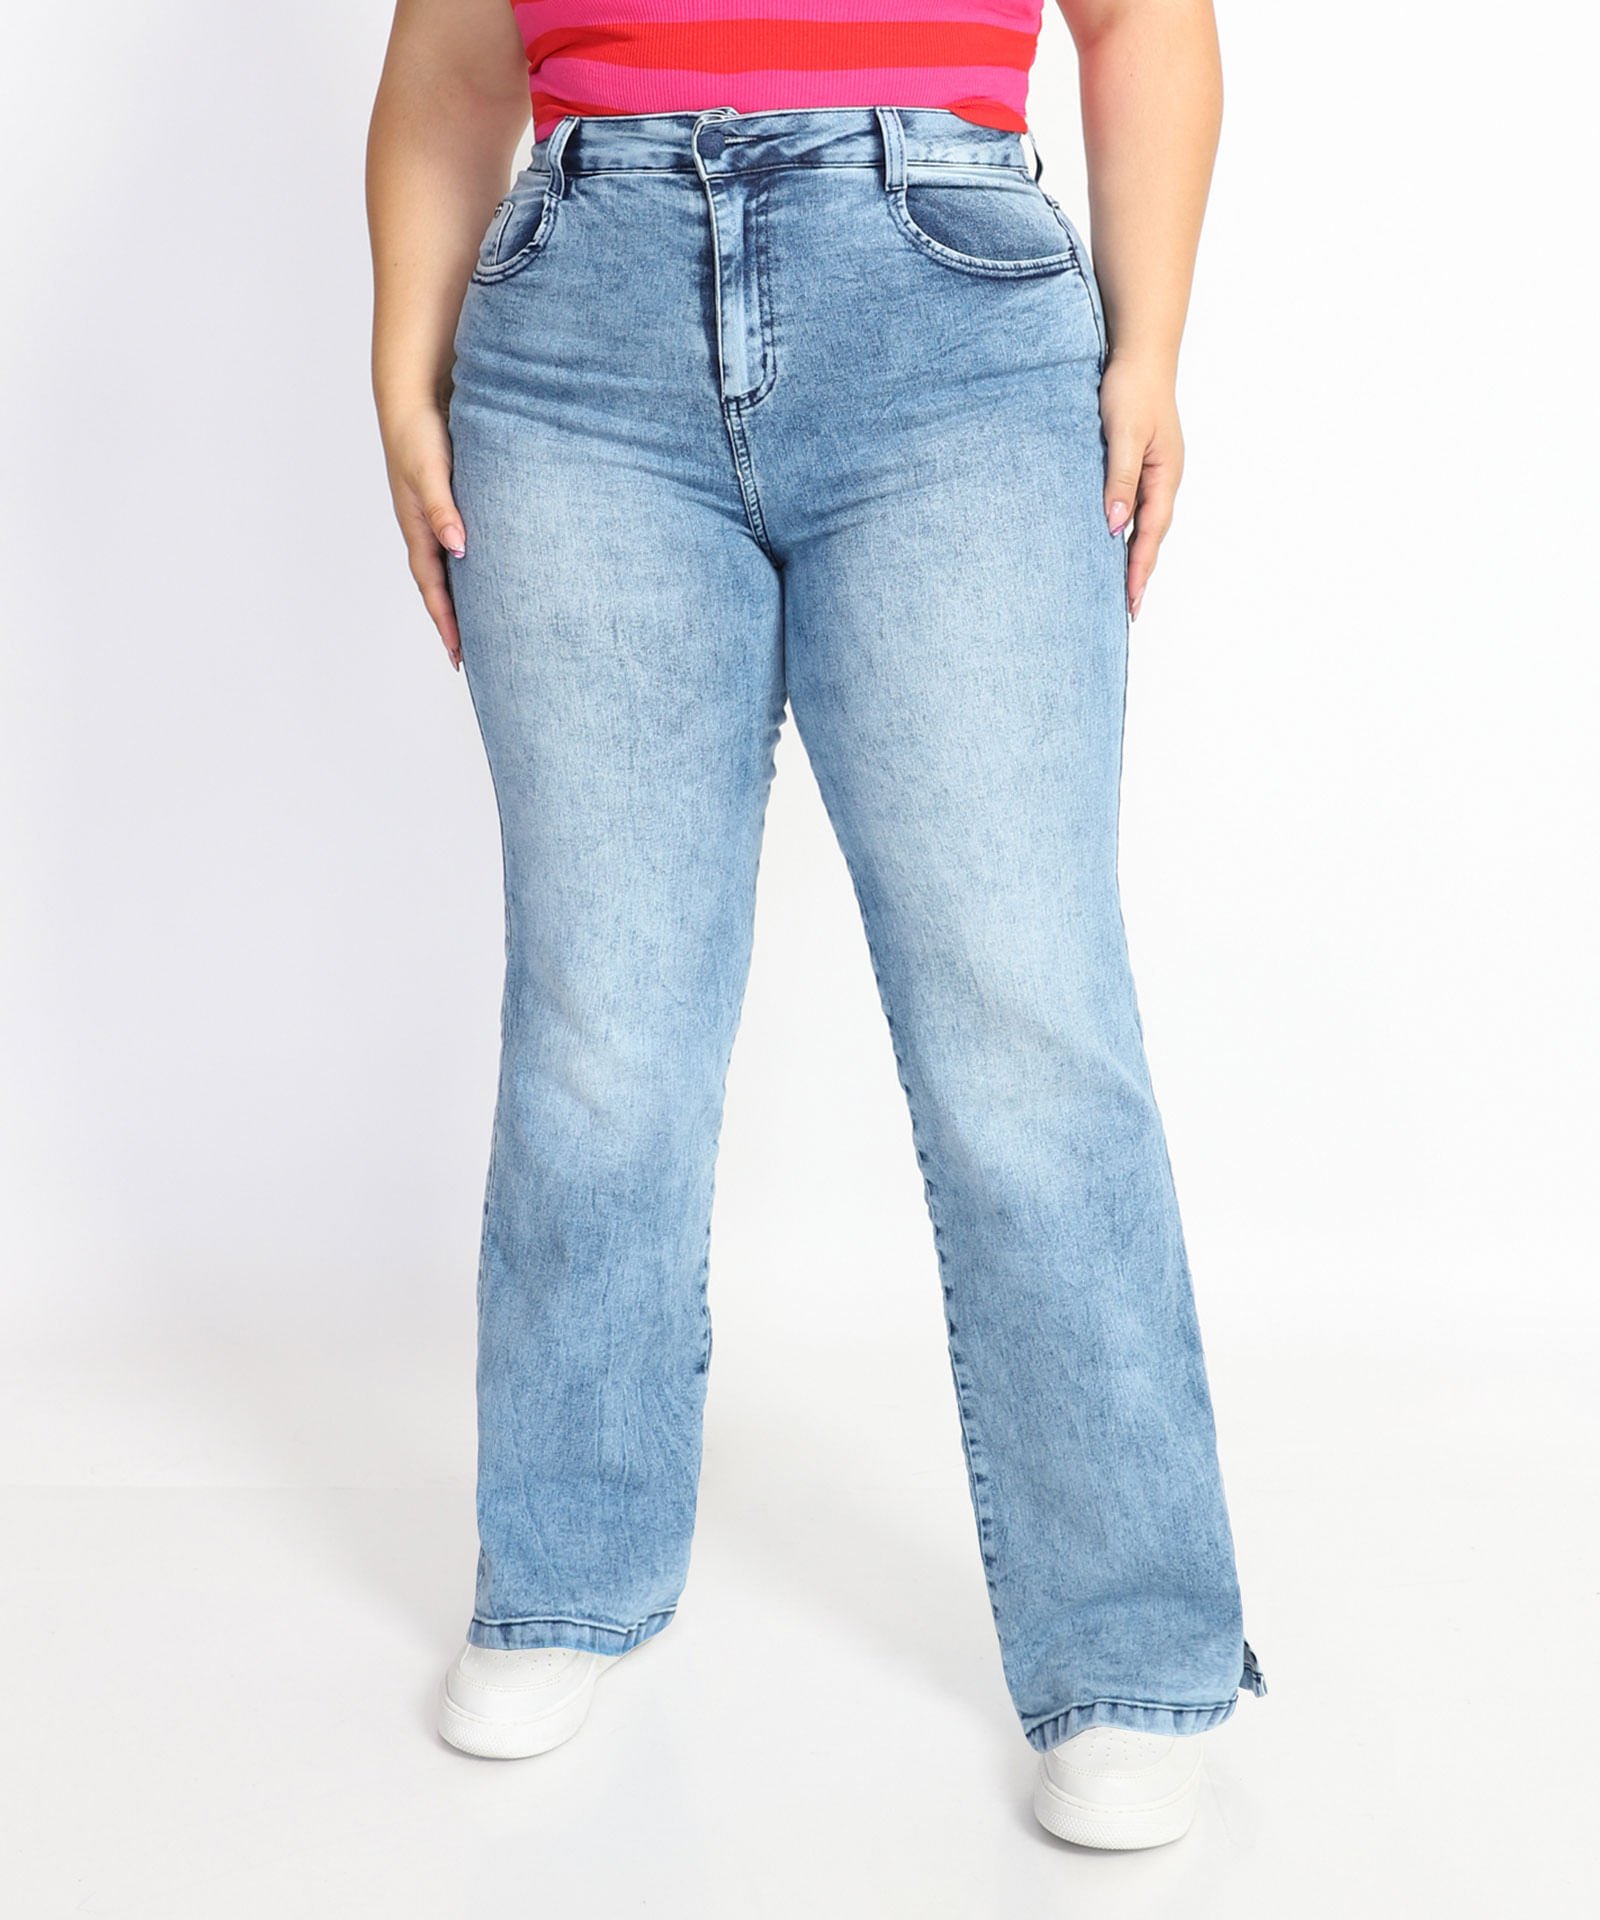 Jeans Womens Spring Plus Size Fashion Ripped